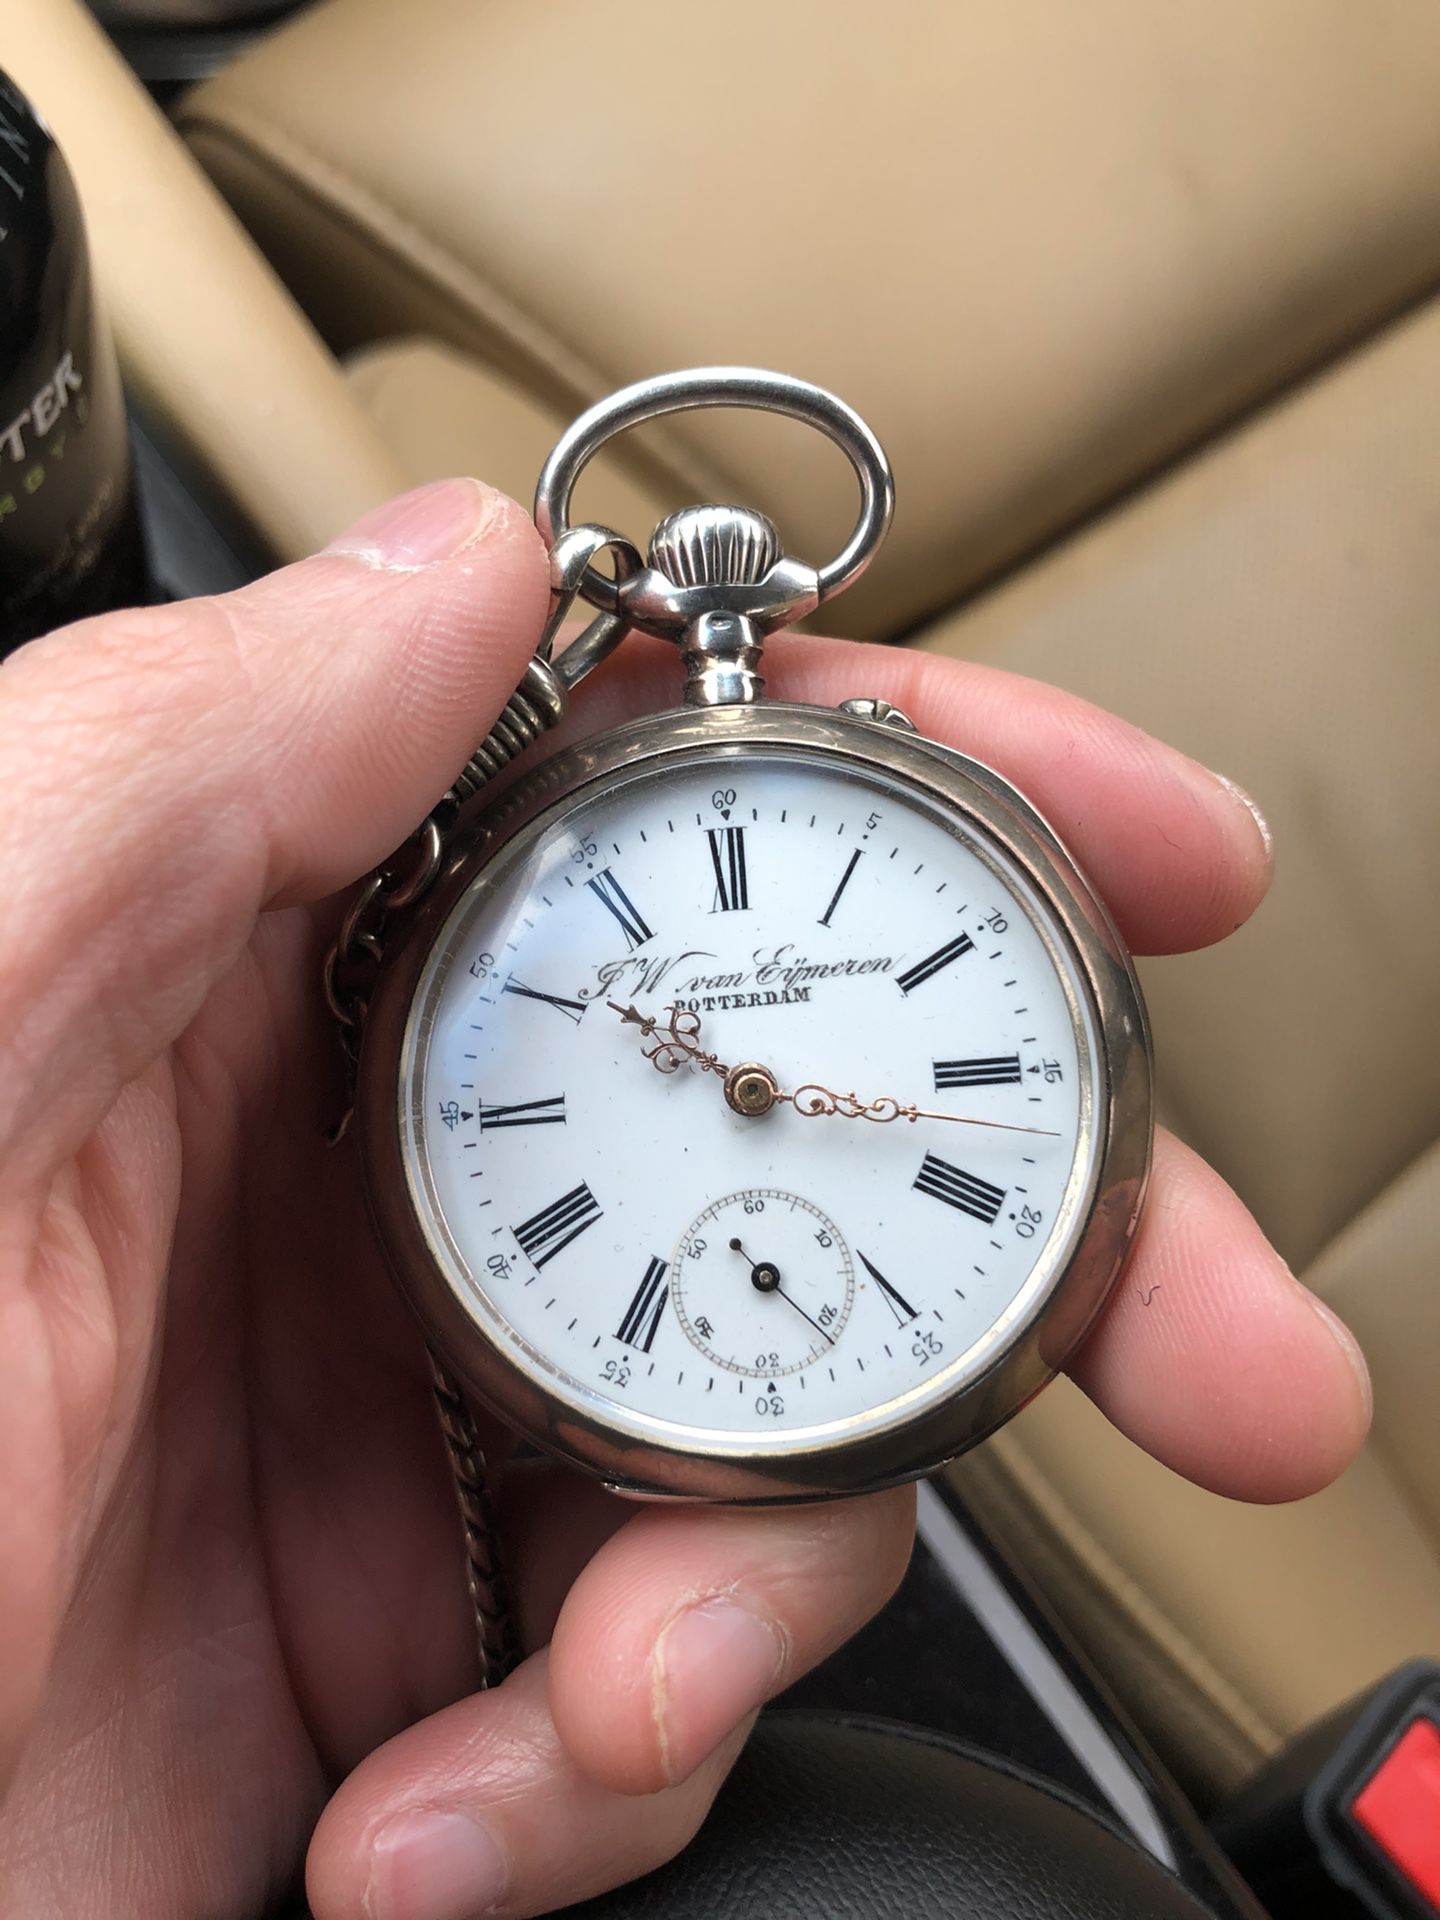 Vintage silver pocket watch with silver chain for sale or trade